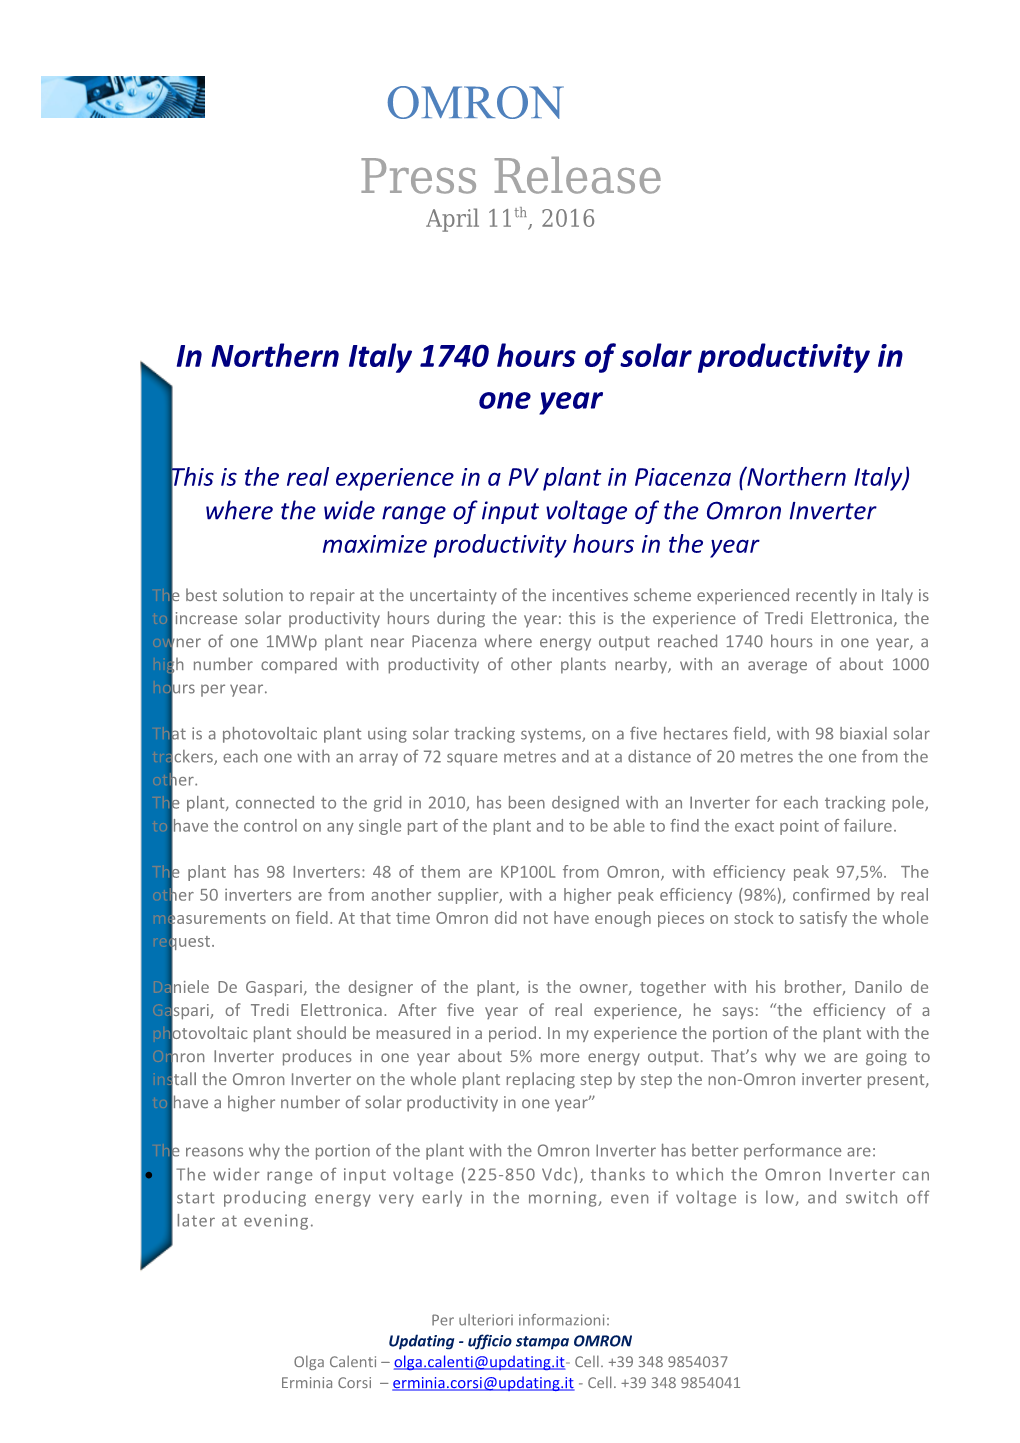 In Northern Italy 1740 Hours of Solar Productivity in One Year